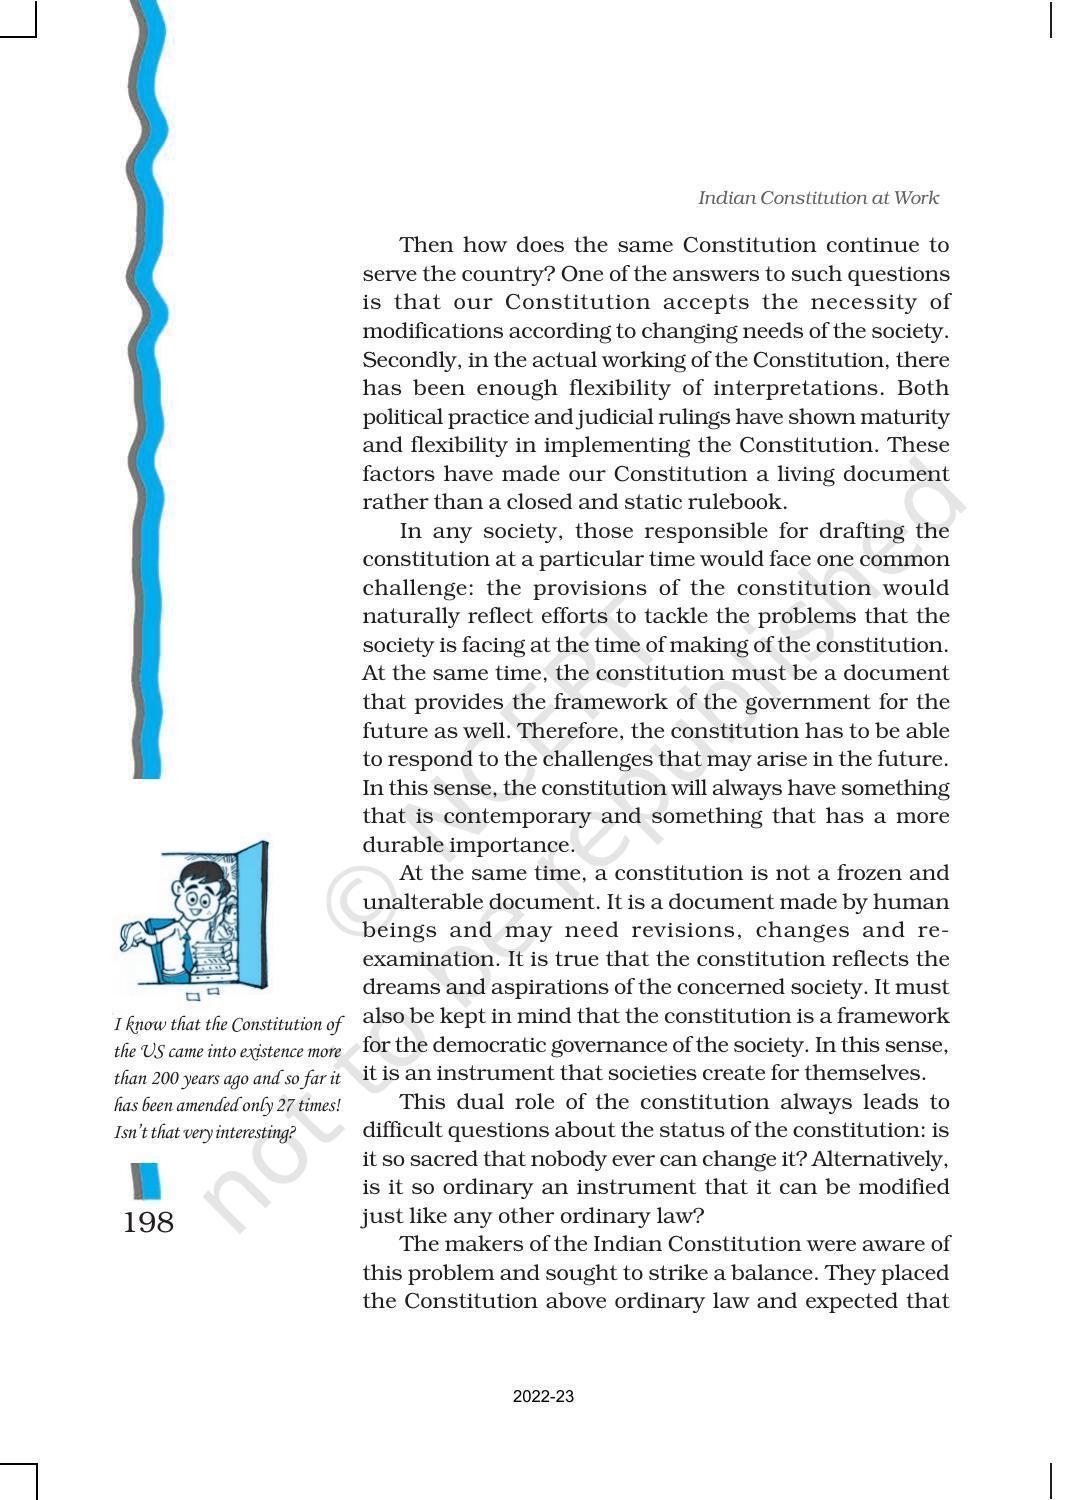 NCERT Book for Class 11 Political Science (Indian Constitution at Work) Chapter 9 Constitution as a Living Document - Page 3